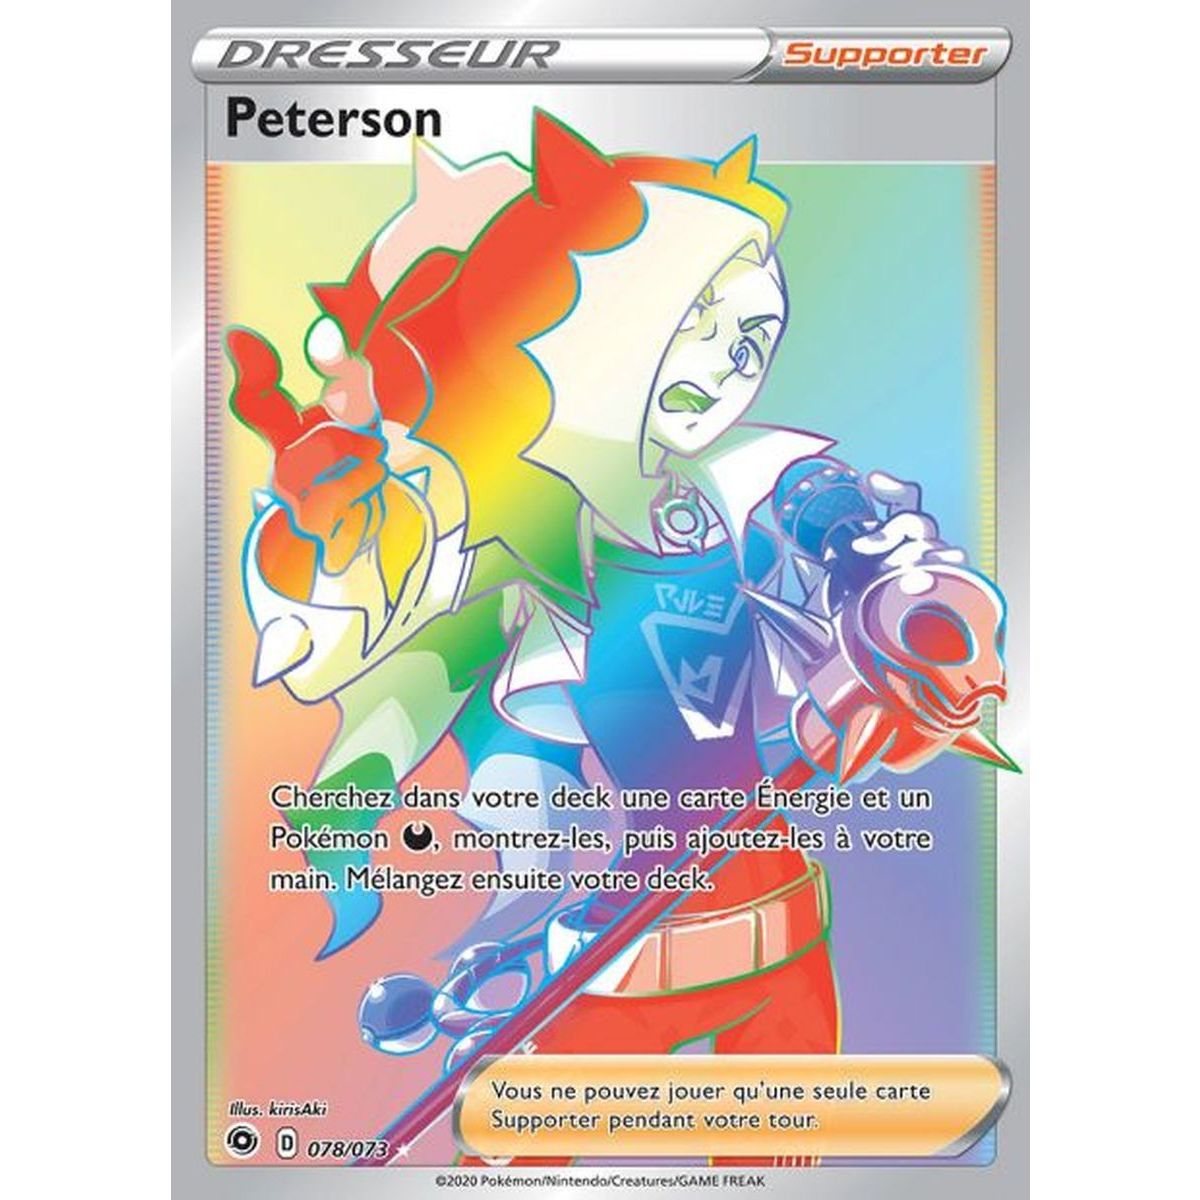 Peterson - Secret Rare 78/73 EB3. Sword and Shield 3.5: The Way of the Master